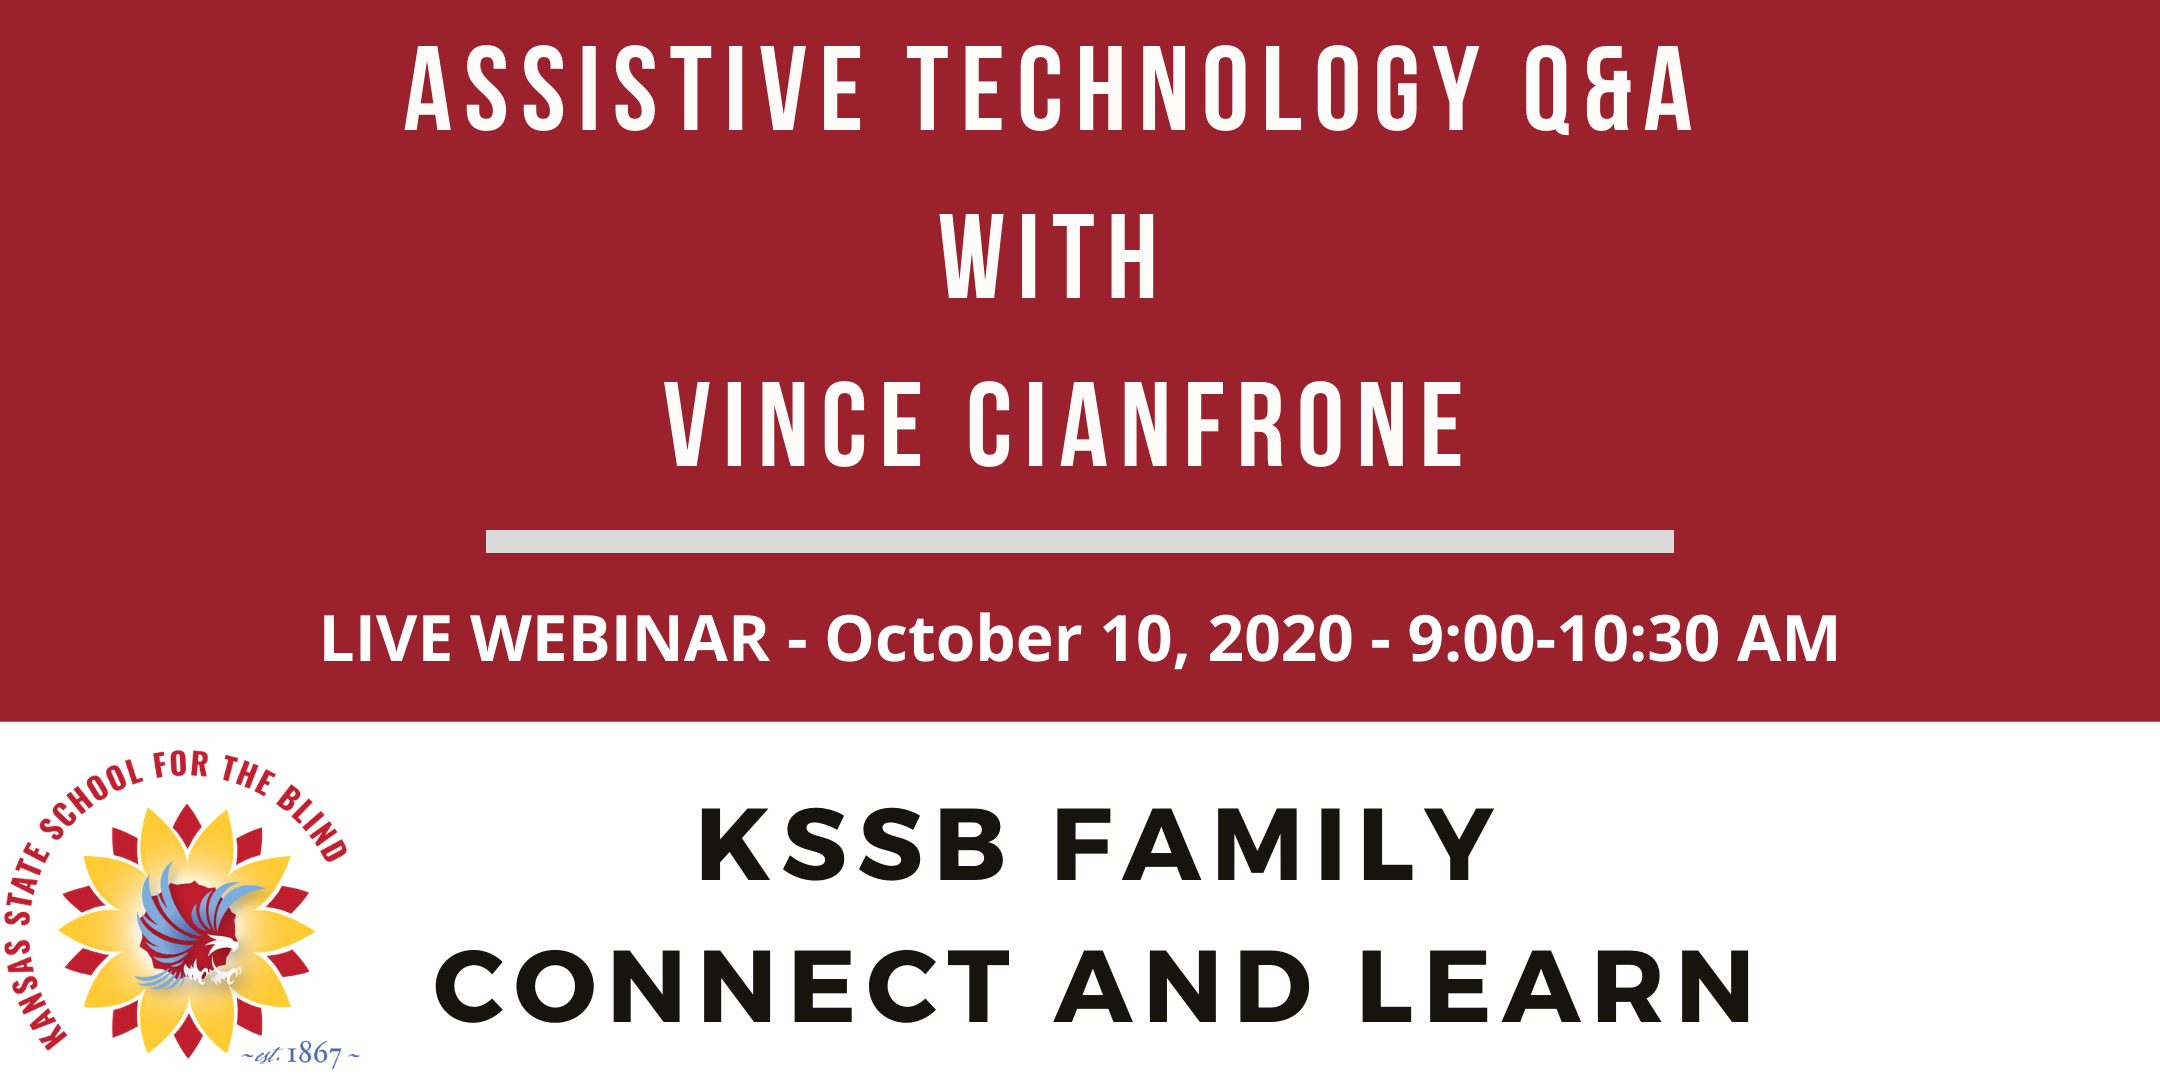 Assistive Technology Q&A with Vince Cianfrone. Live Webinar, October 10, 2020 - 9:00am to 10:30am, KSSB Family Connect and Learn